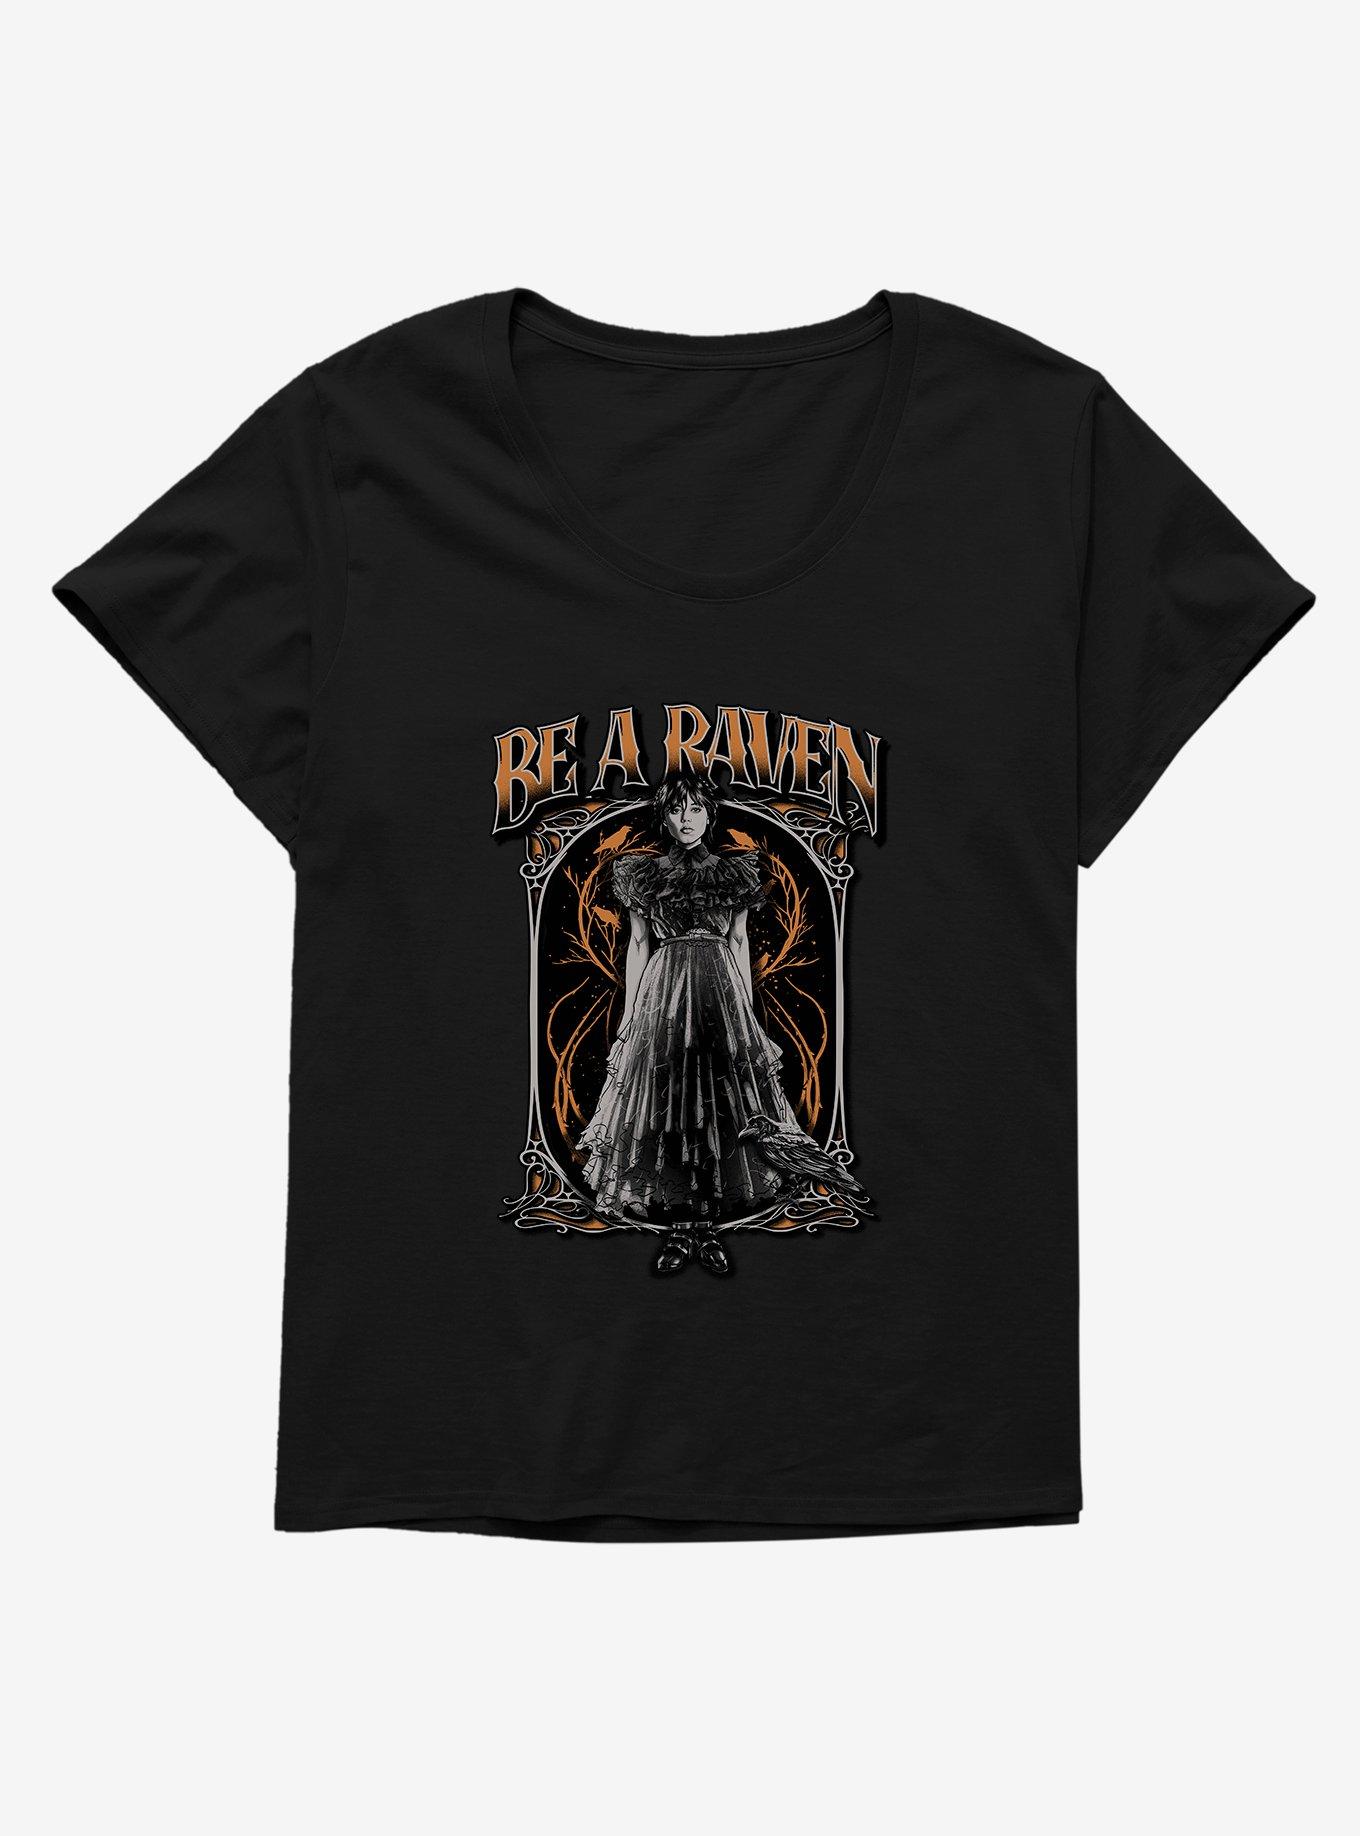 Wednesday Be A Raven Womens T-Shirt Plus Size, BLACK, hi-res